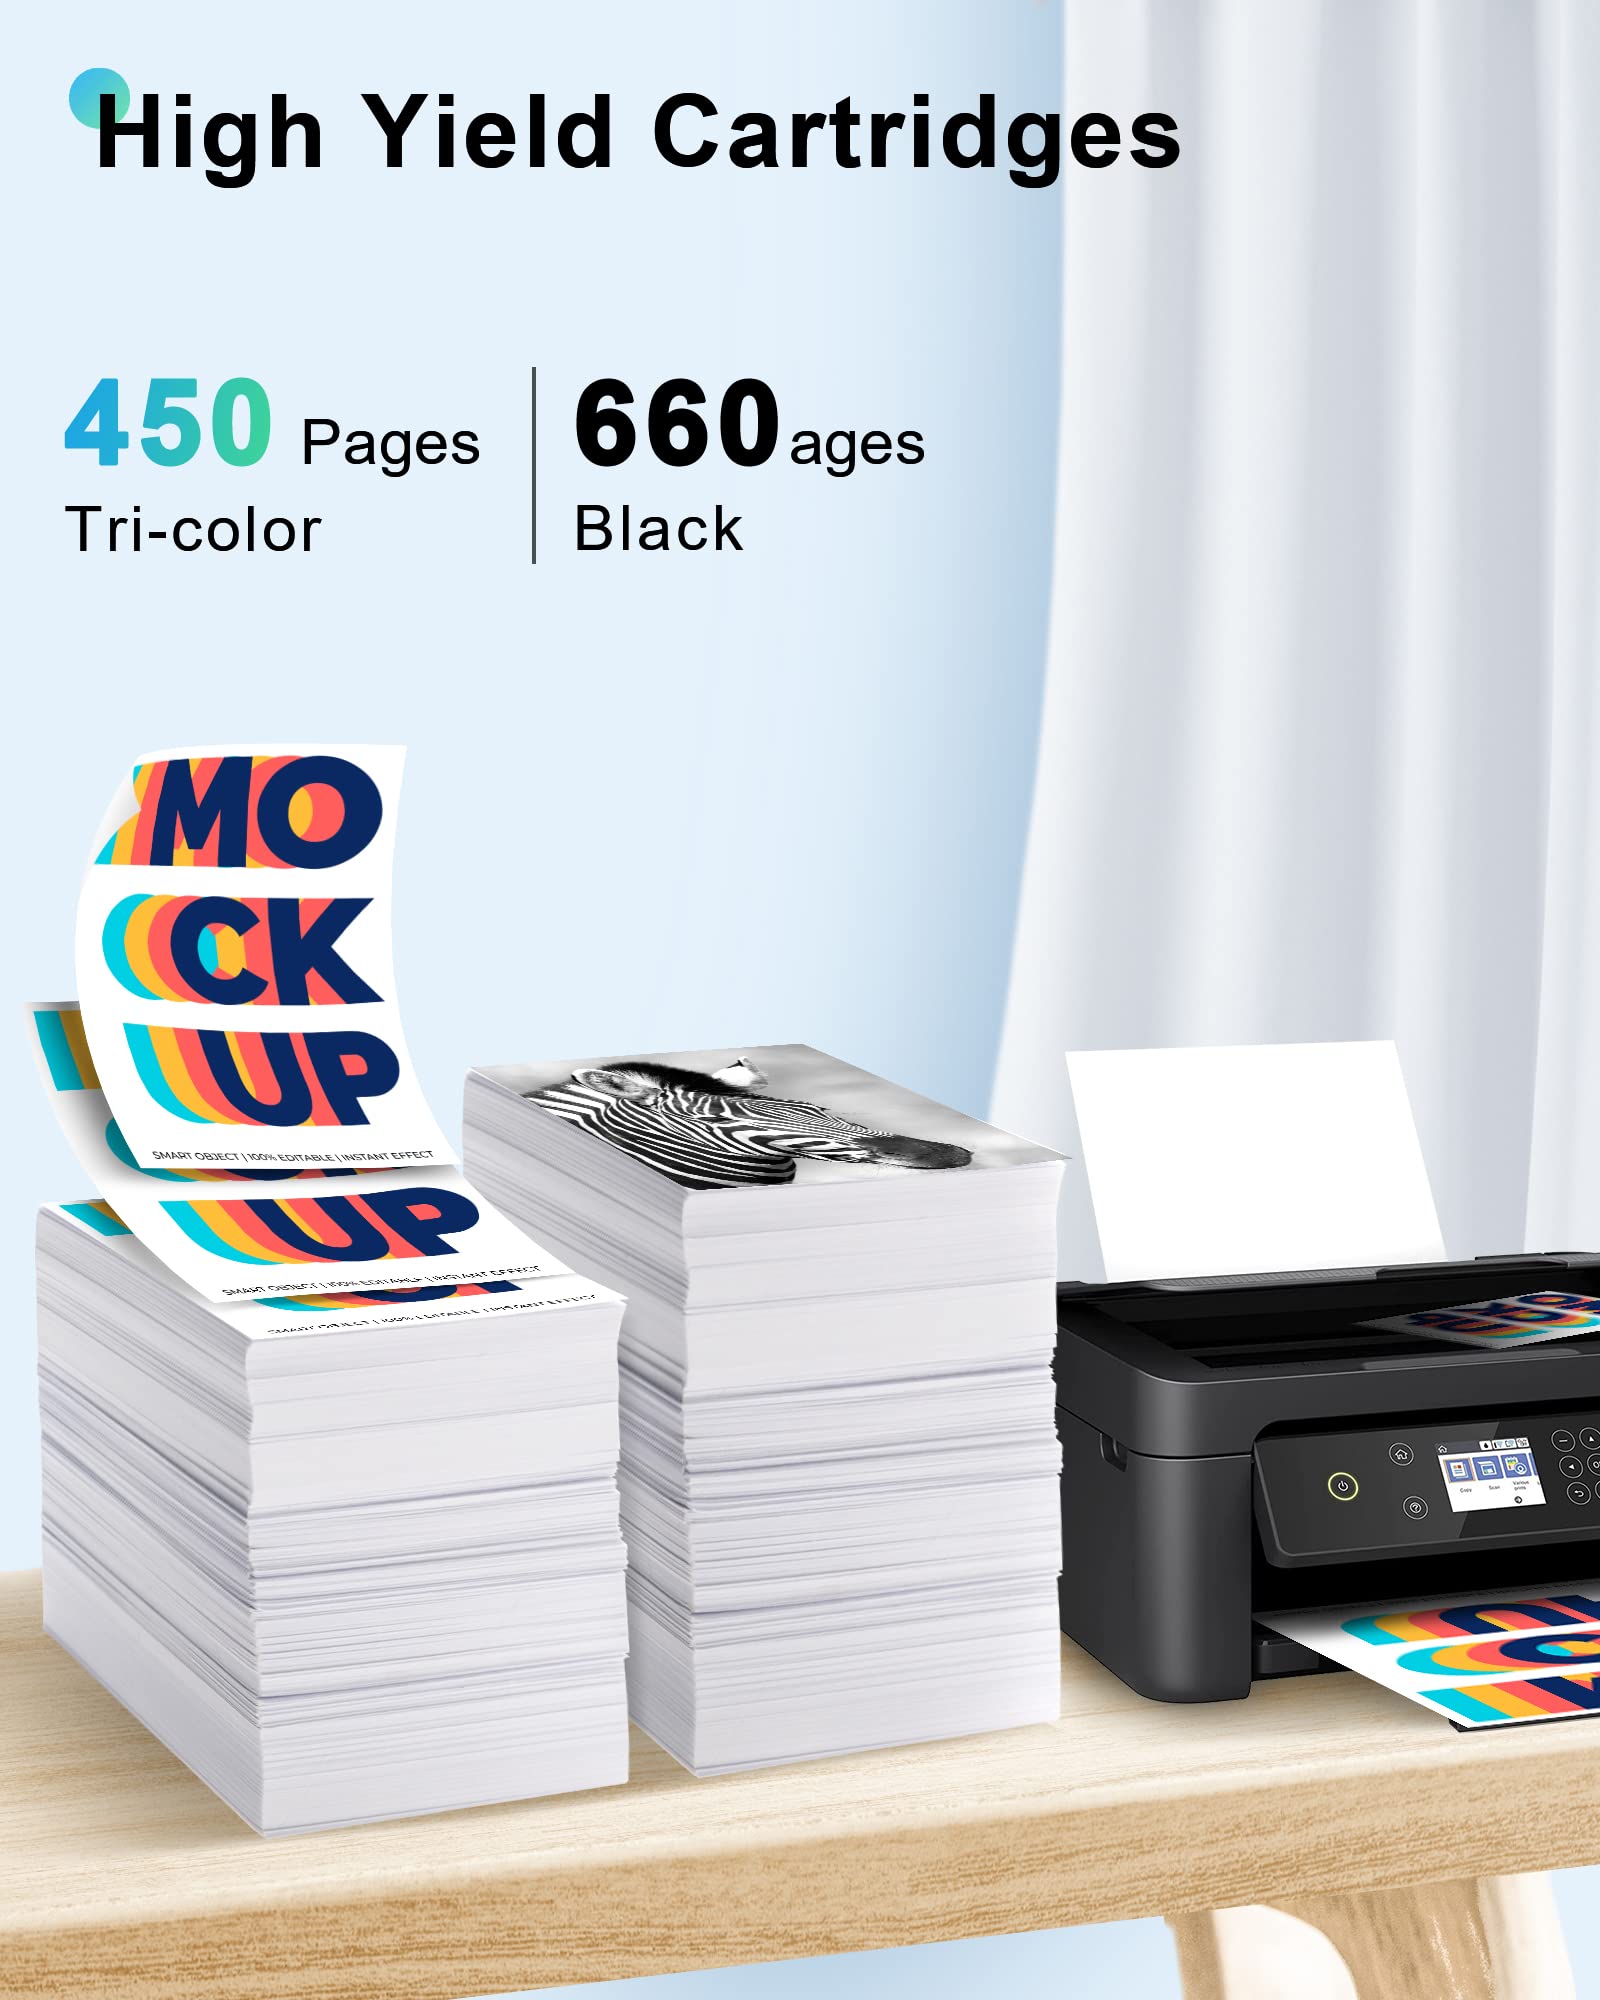 62XL Ink Cartridge Black and Color Combo Pack High Yield Replacement for HP Ink 62 XL for HP Envy 7640 7645 5660 5642 5540 OfficeJet 8045 8040 5746 5745 5740 5740 258 250 200(1 Black, 1 Tri-Color)